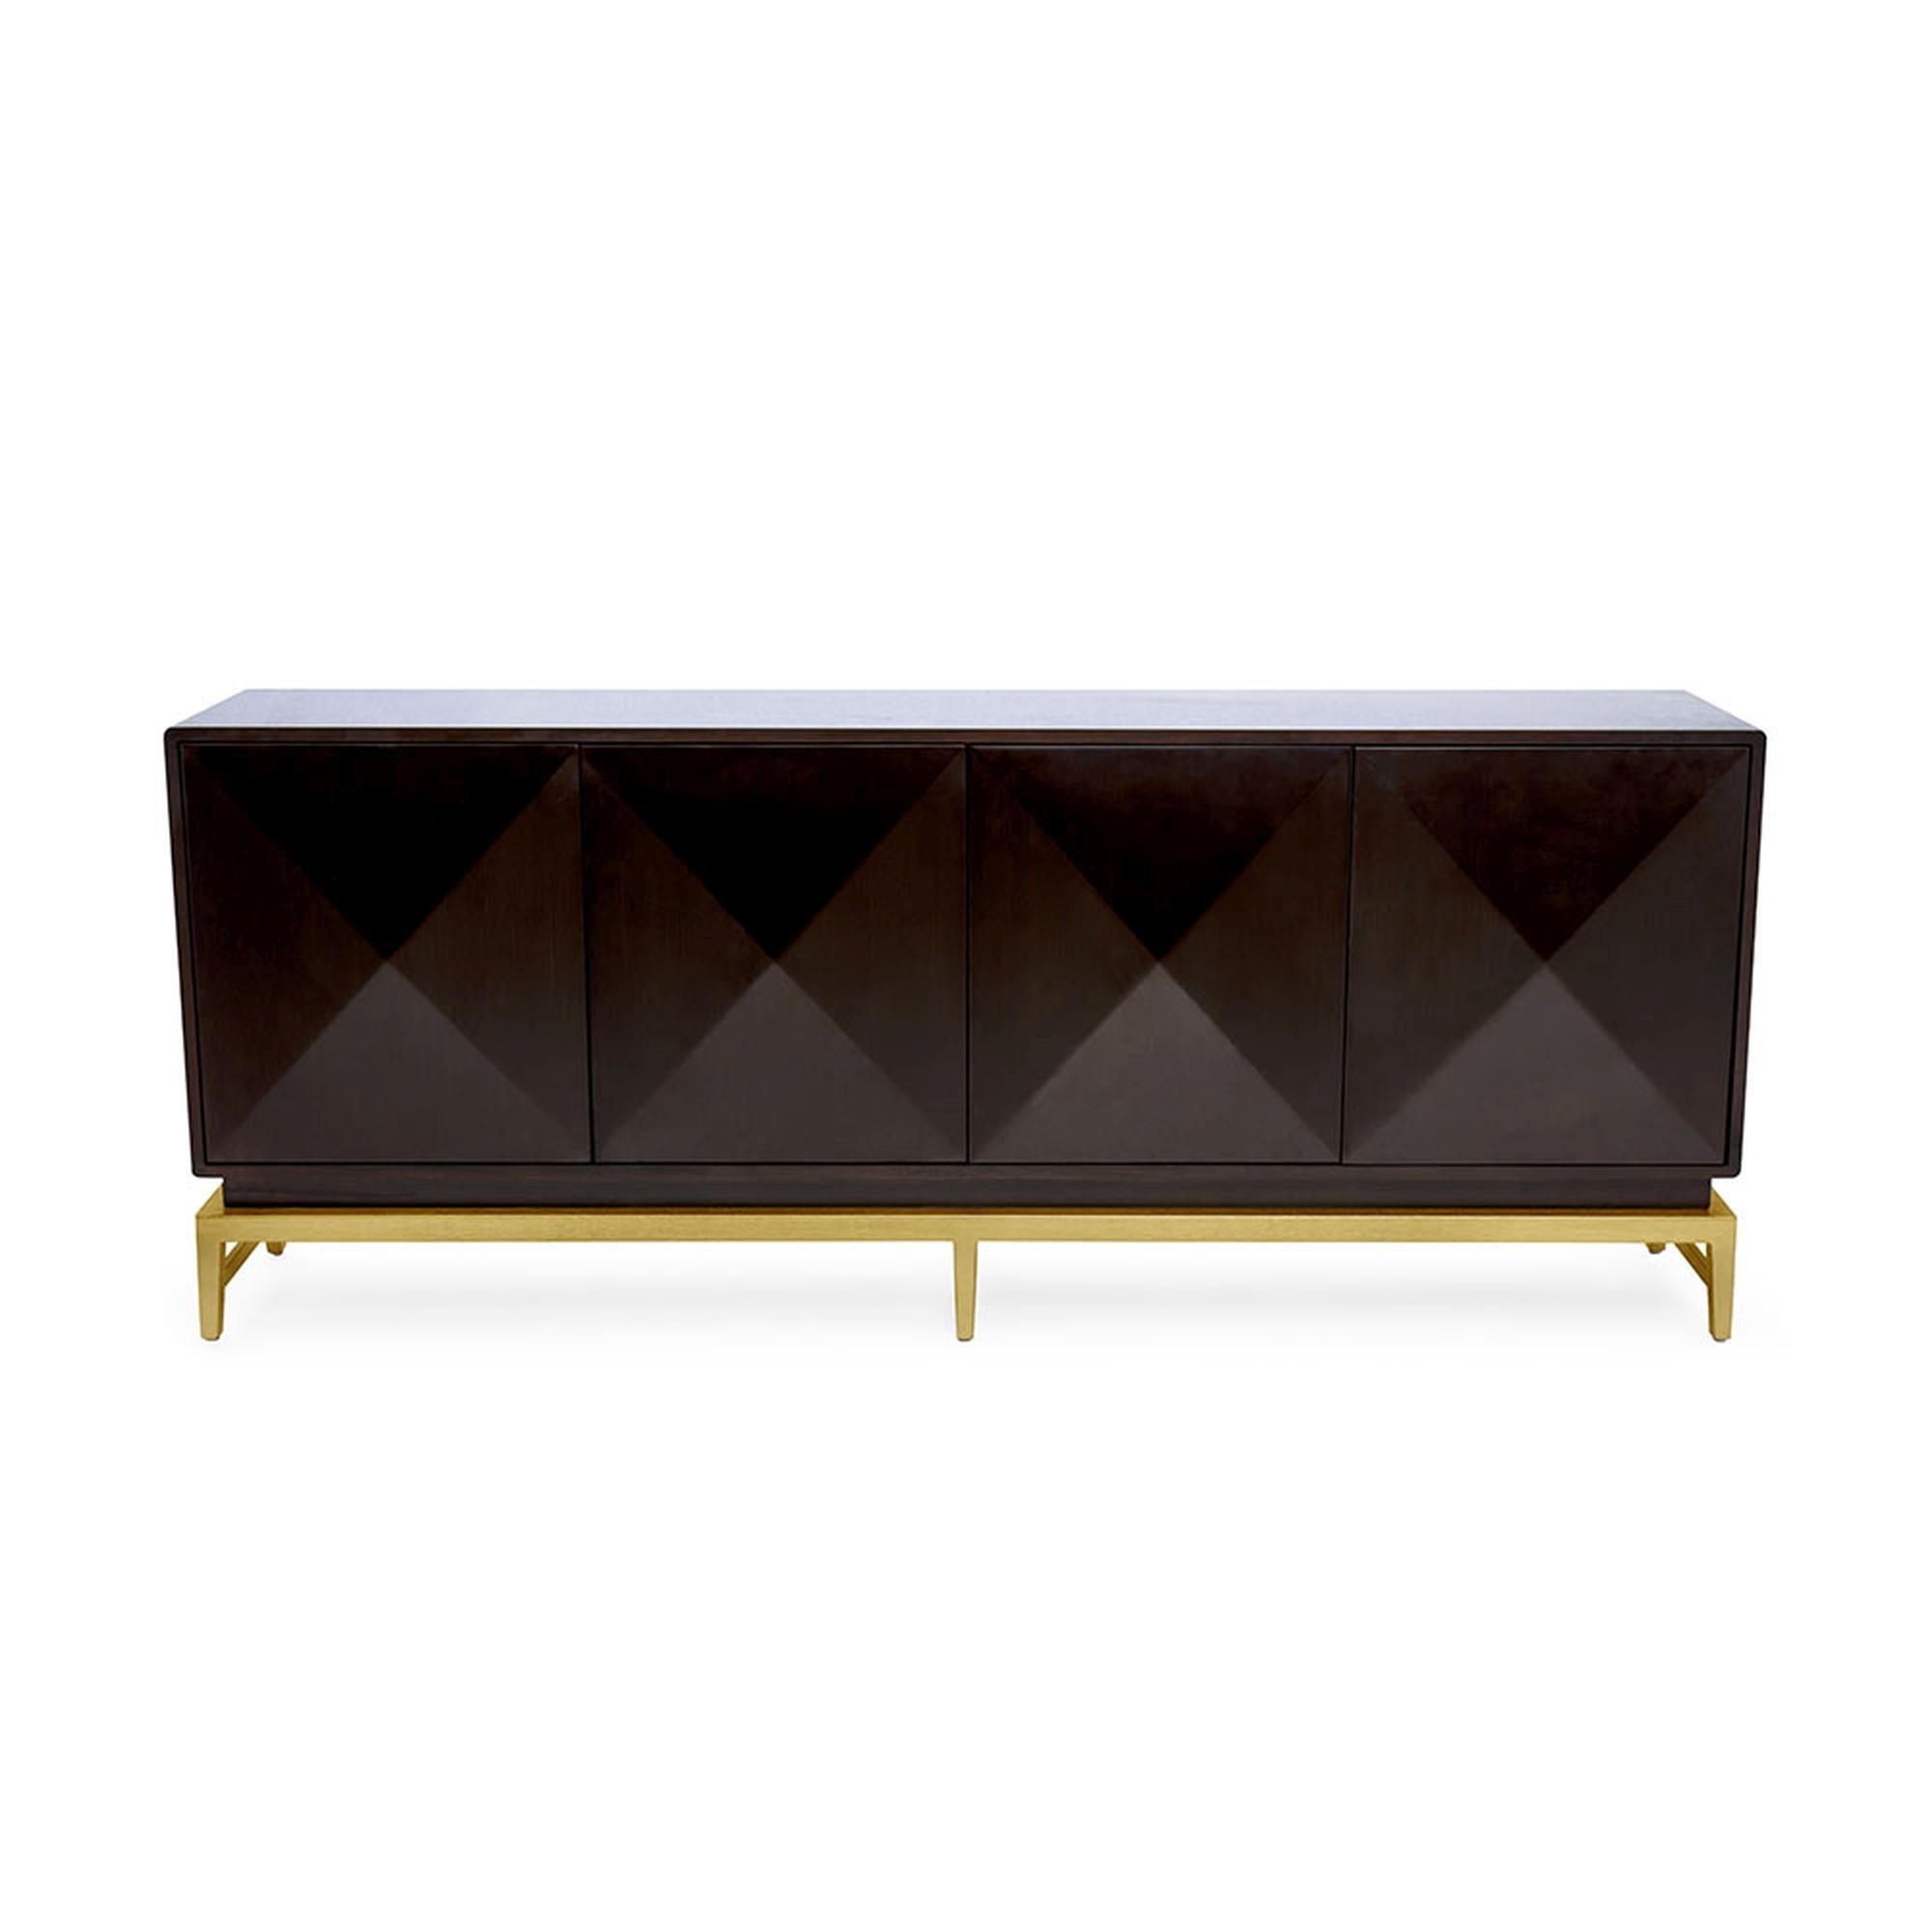 The Catalina sideboard is an elegant, grand piece that brings scale to any room. Made of solid wood, it features four touch-to-open doors in a unique pyramid shape. The woodwork offers a clean and sophisticated silhouette. The wood cabinet rests on